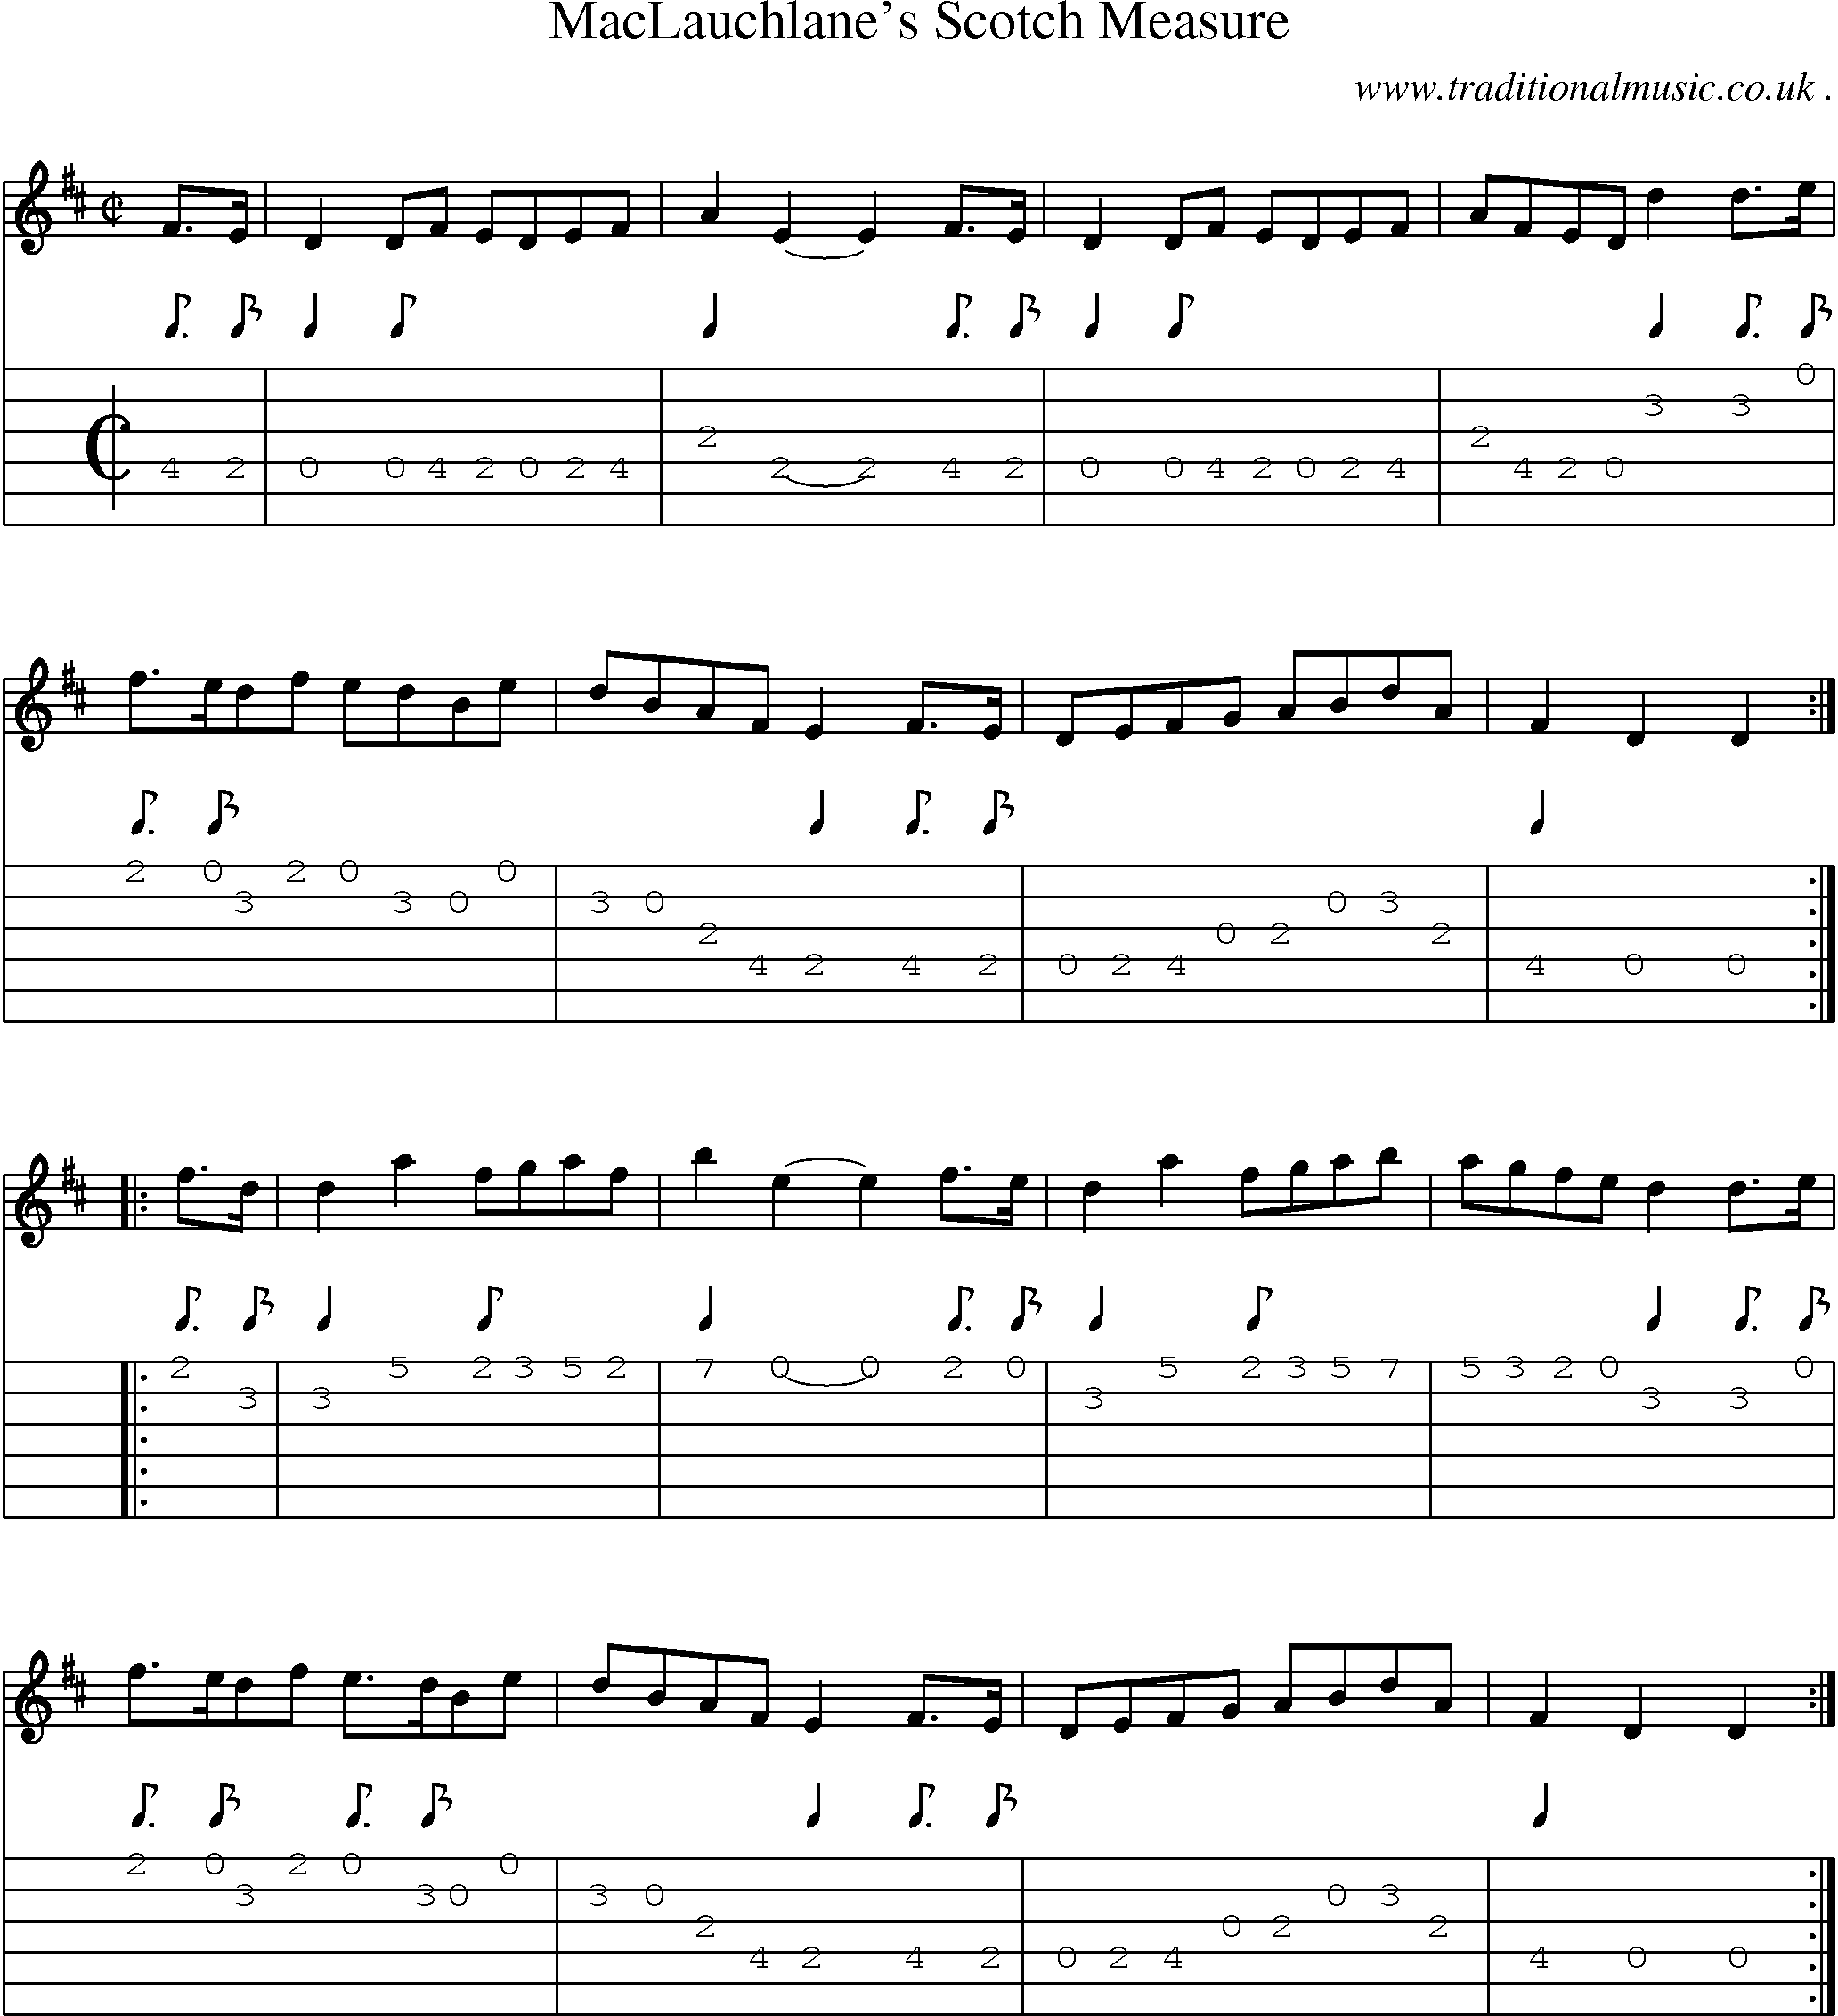 Sheet-music  score, Chords and Guitar Tabs for Maclauchlanes Scotch Measure